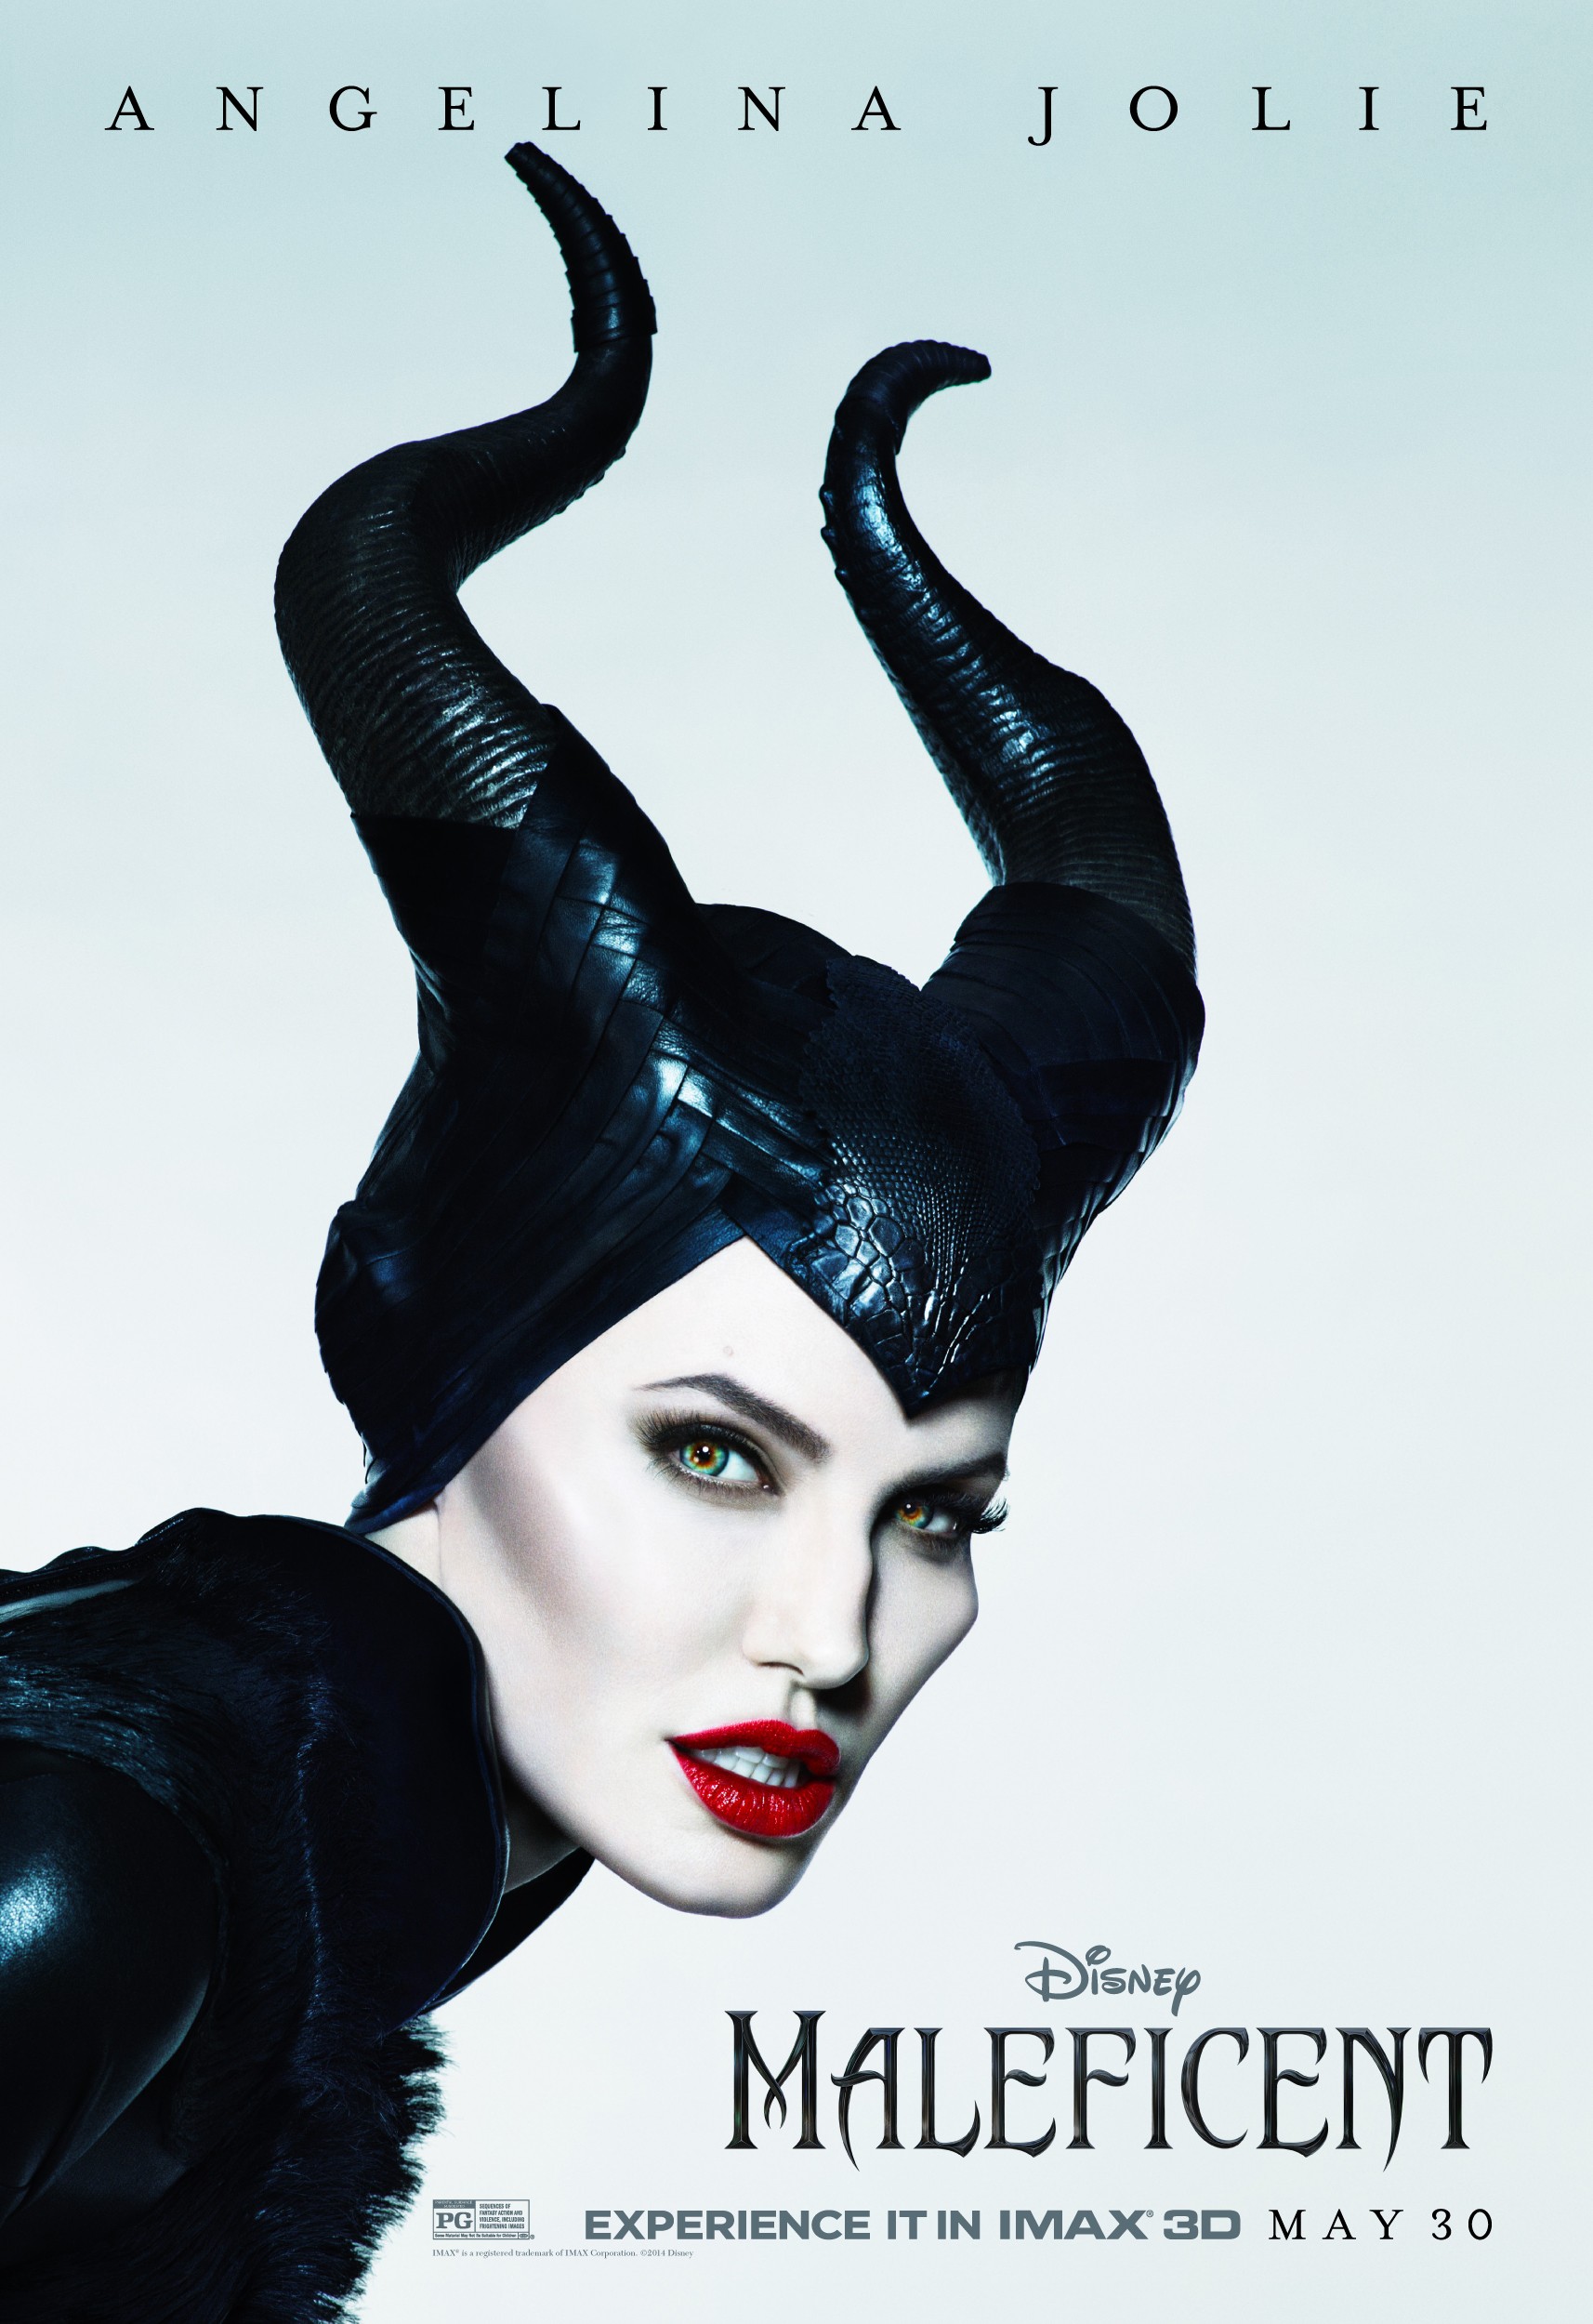 Mega Sized Movie Poster Image for Maleficent (#14 of 14)